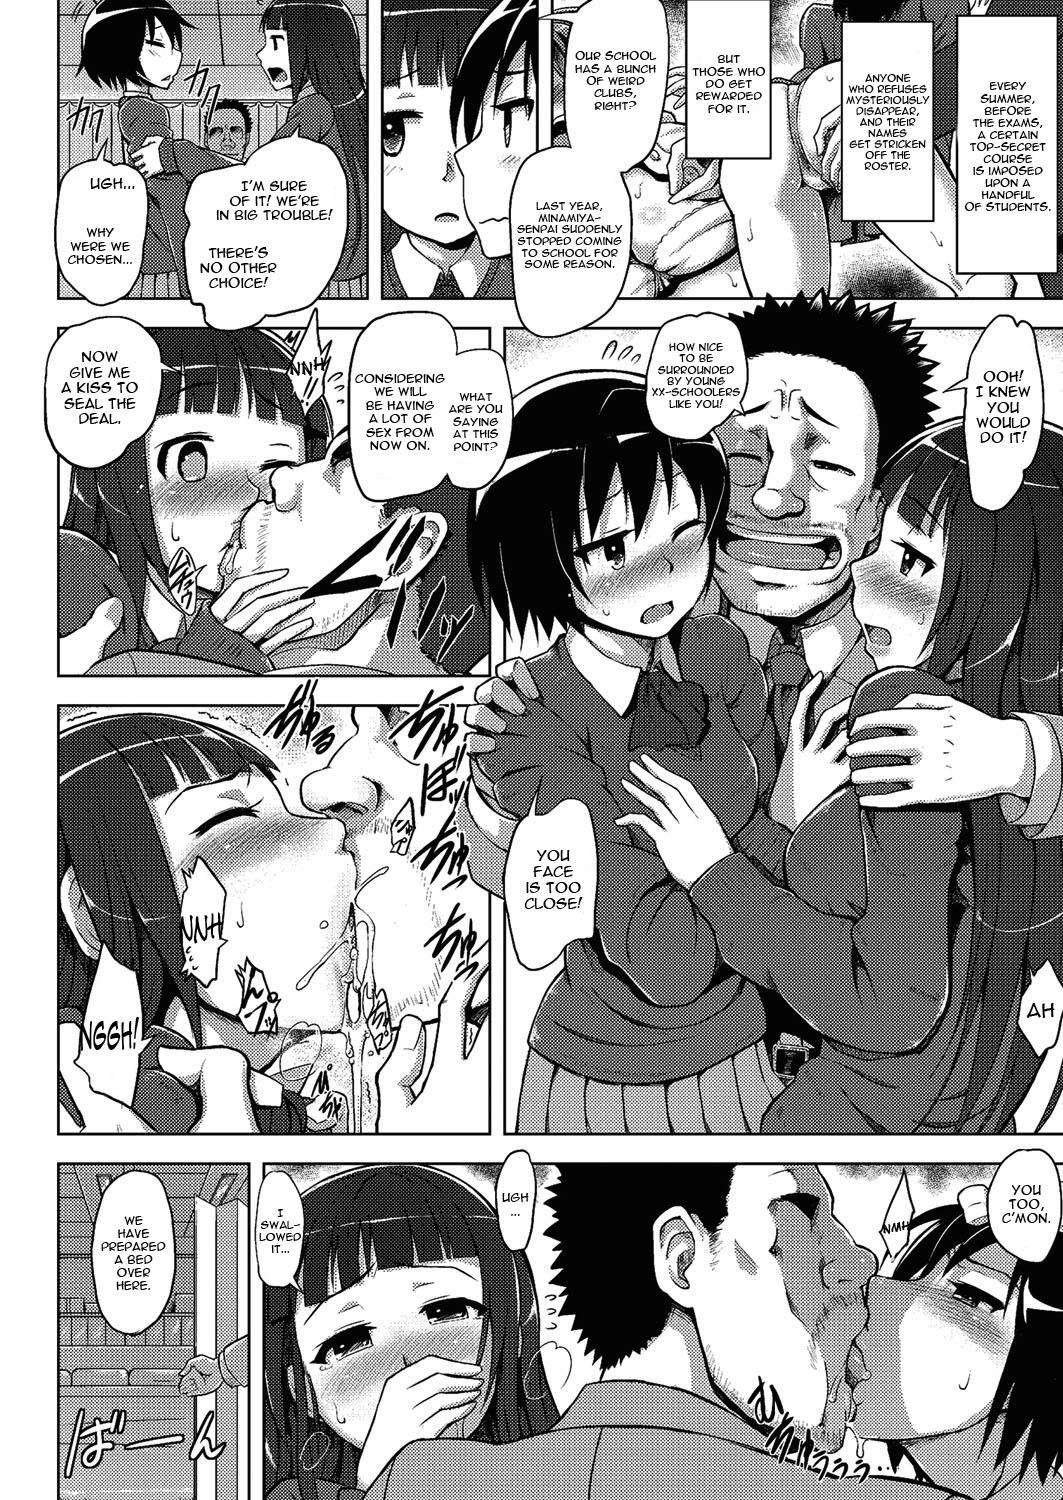 Cream Immoral Lesson Ass - Page 4